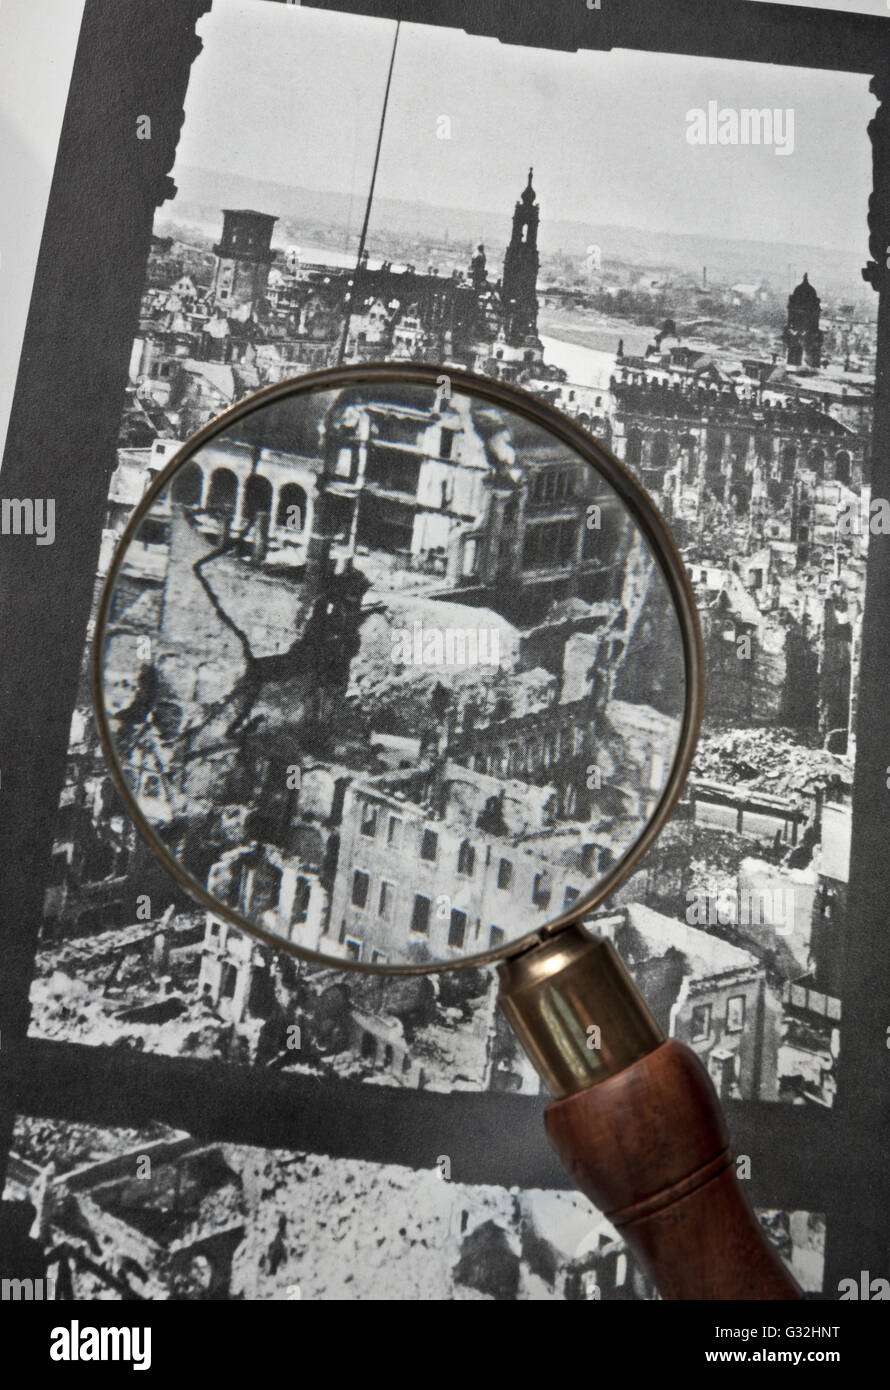 DRESDEN BOMBING Magnifying glass viewing detail on B&W image of German city of Dresden which was almost destroyed by allied bombing in WW2 Stock Photo